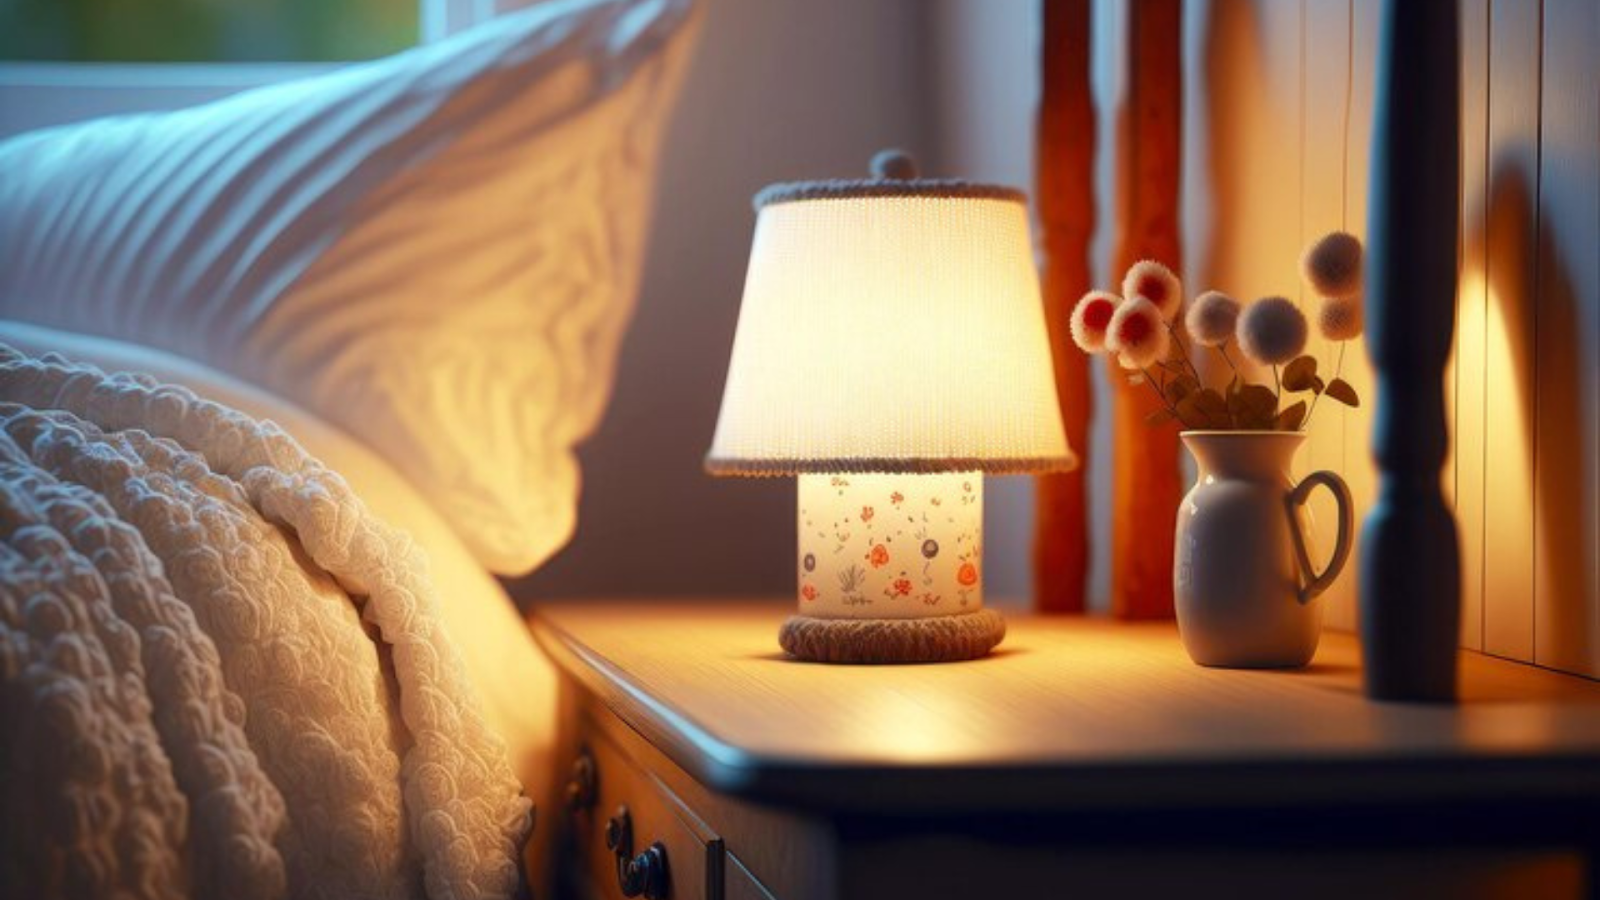 Warm up your winter nights with the vintage charm of a bedside lamp. Timeless coziness at its best.